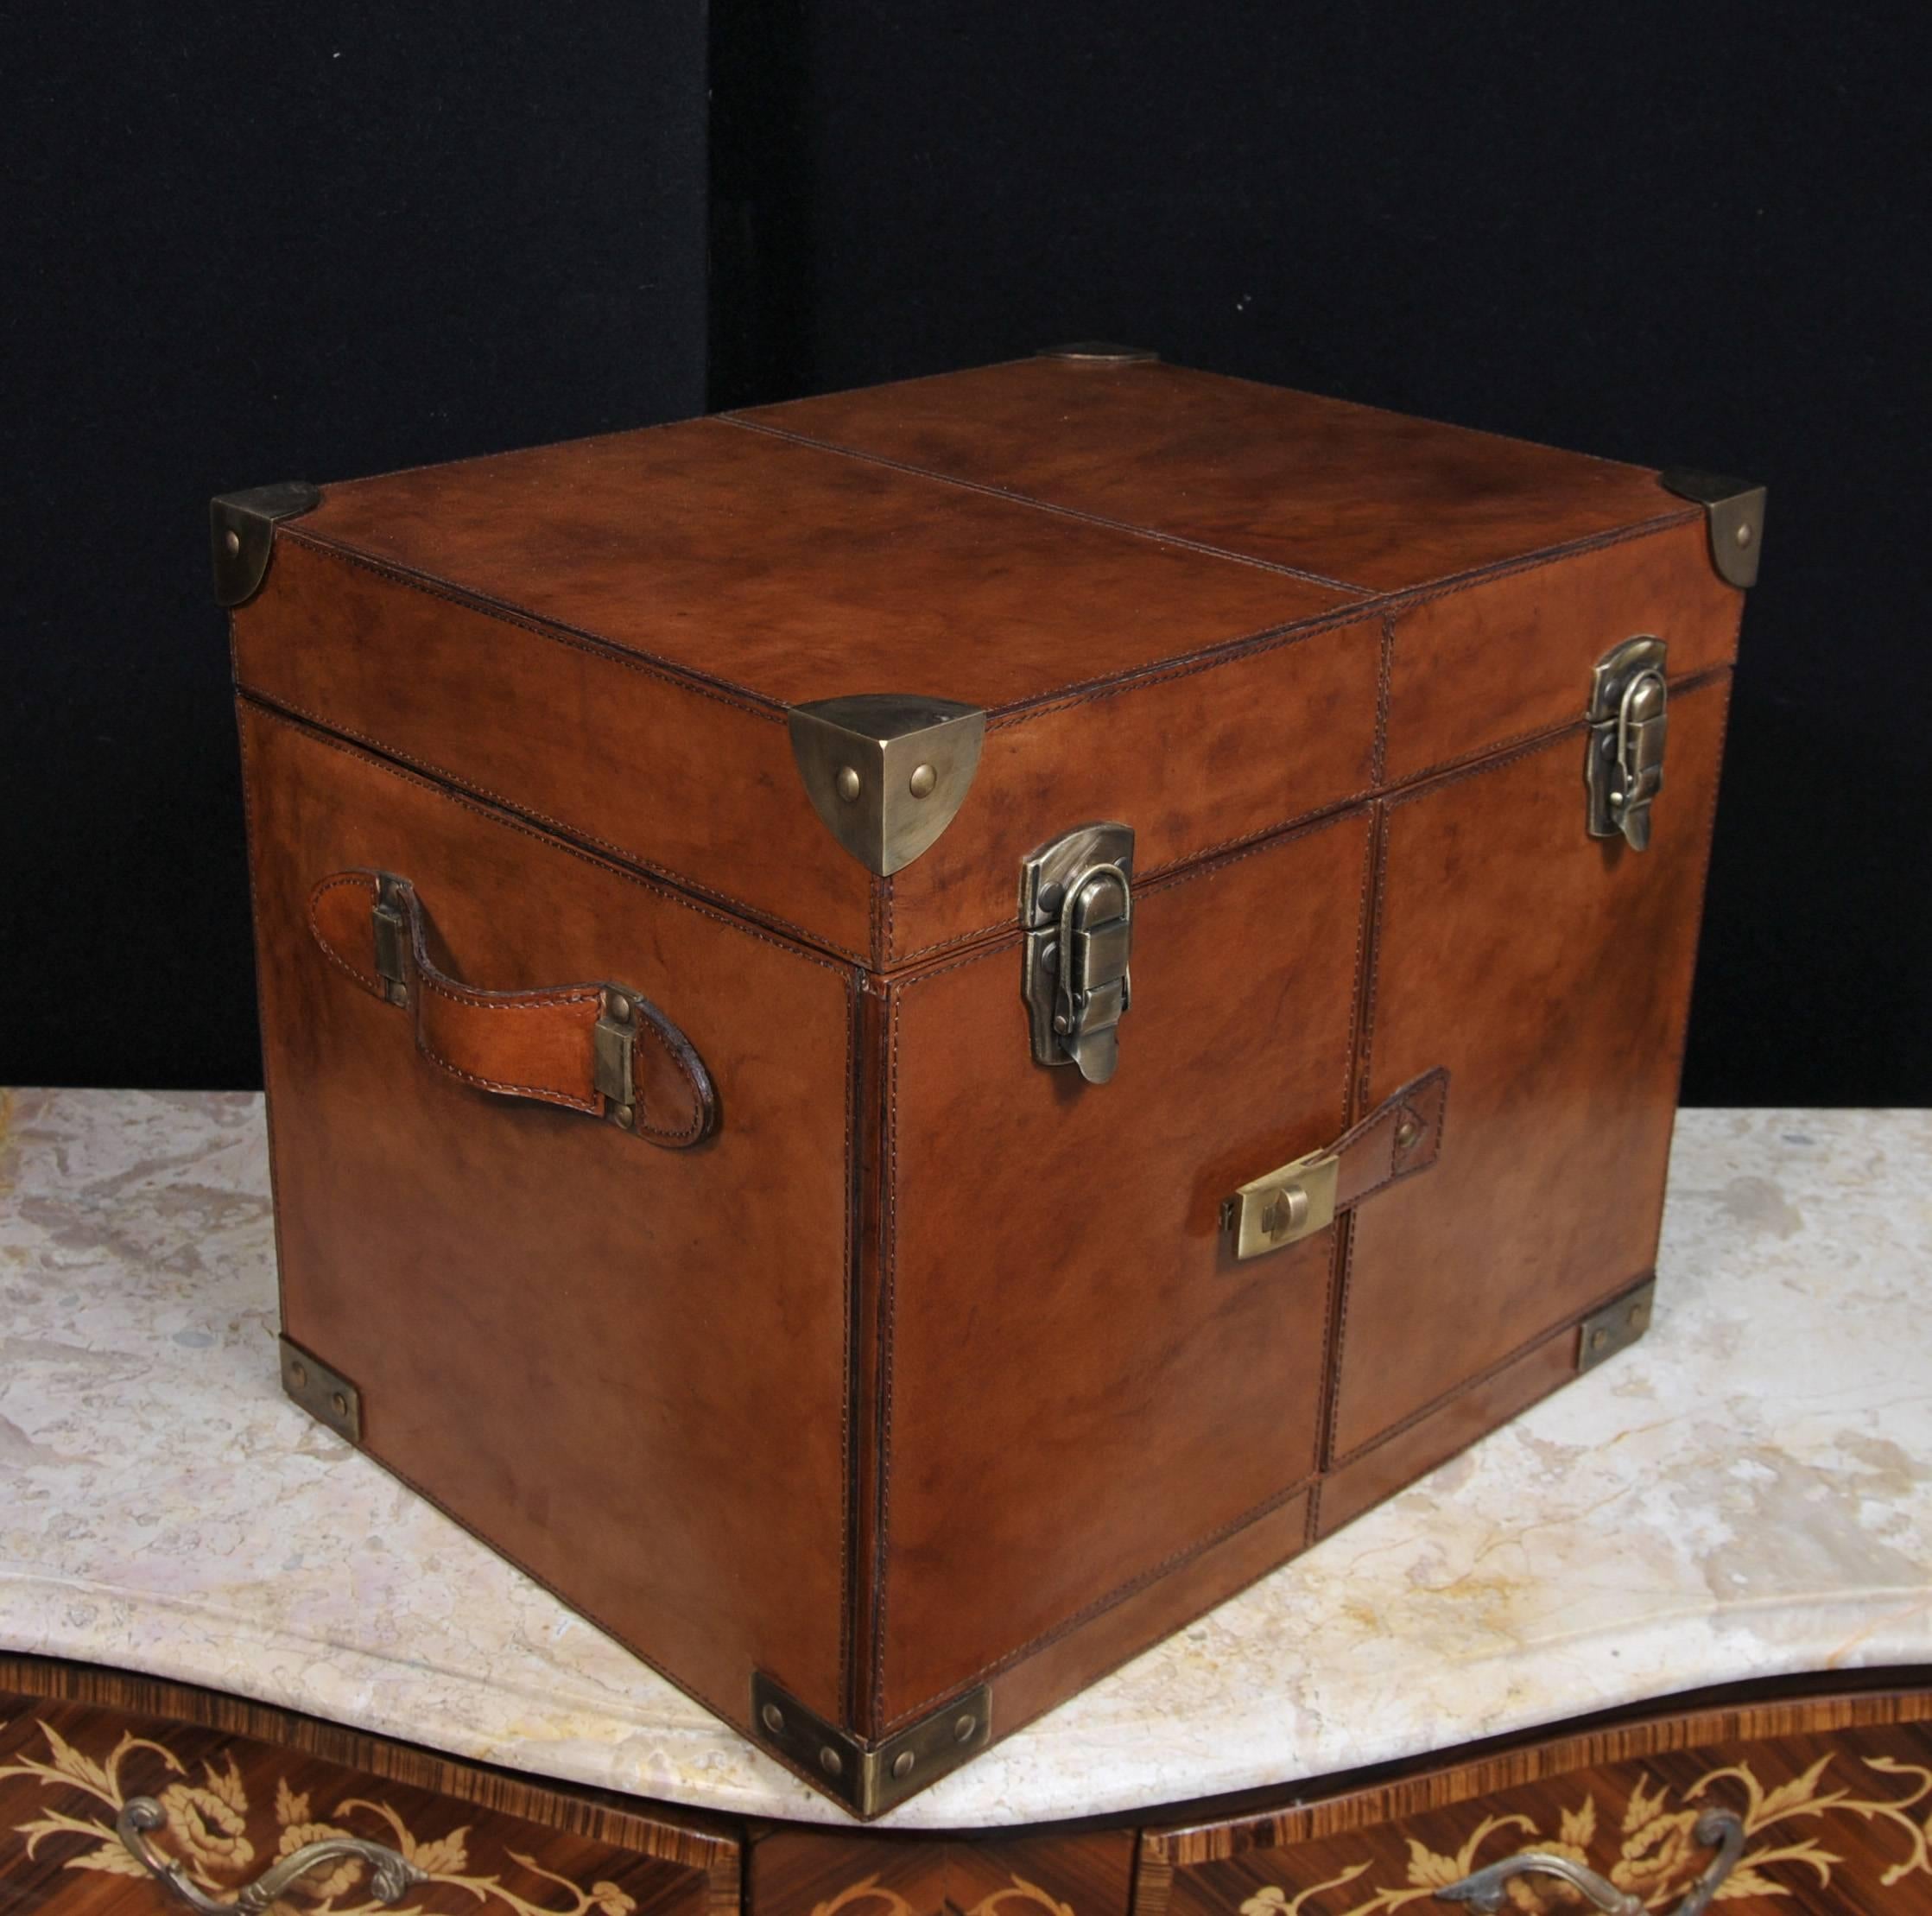 What a delight - gorgeous hamper and wine box perfect for glorious Goodwood or Glyndebourne (or any events on the summer season).
Leather trunk has that trendy campaign furniture look with burnished metal corner protectors and straps.
Top opens